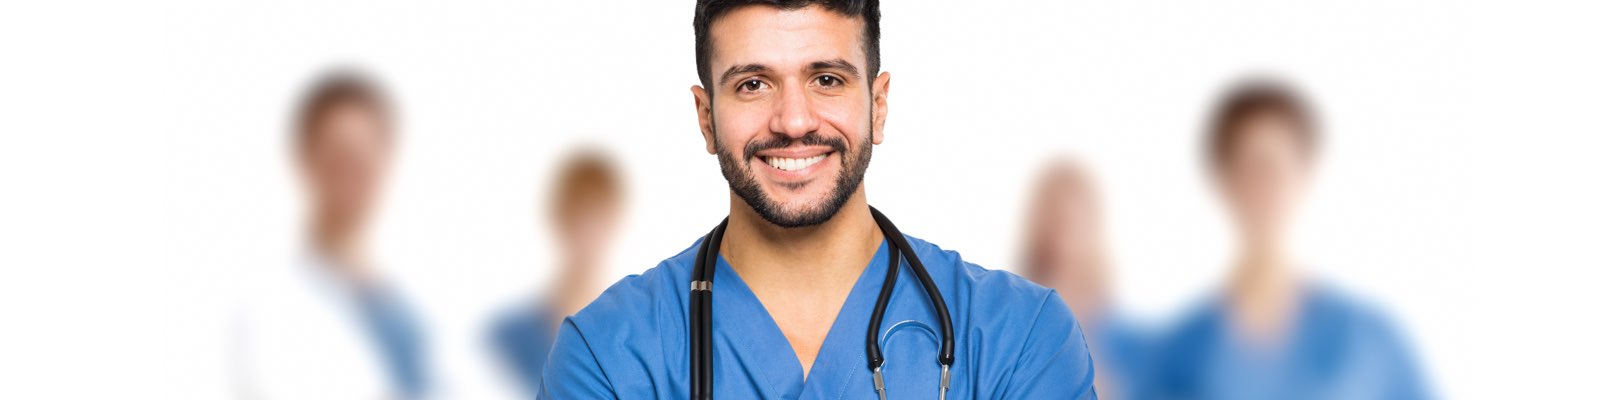 Male nurse smiling in front of team of doctors